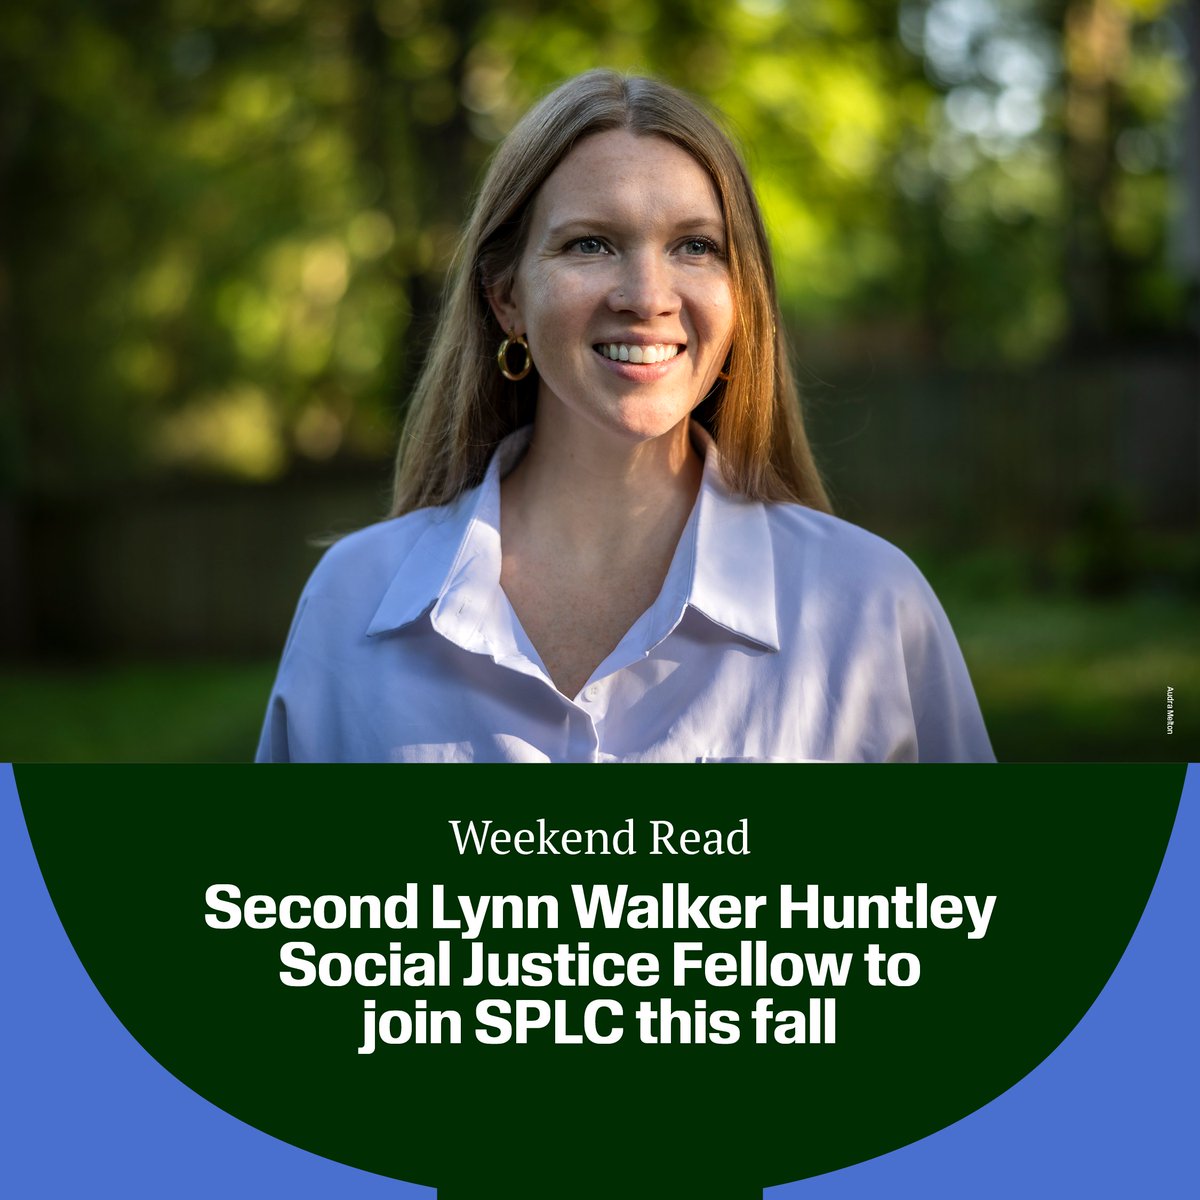 Camille Pendley Hau is the second recipient of the @SouthernEdFound Lynn Walker Huntley Social Justice Fellowship. She will split her time doing policy work and community engagement at the SEF and work to develop legal strategy at the SPLC. #WeekendRead: bit.ly/4bwkvNo